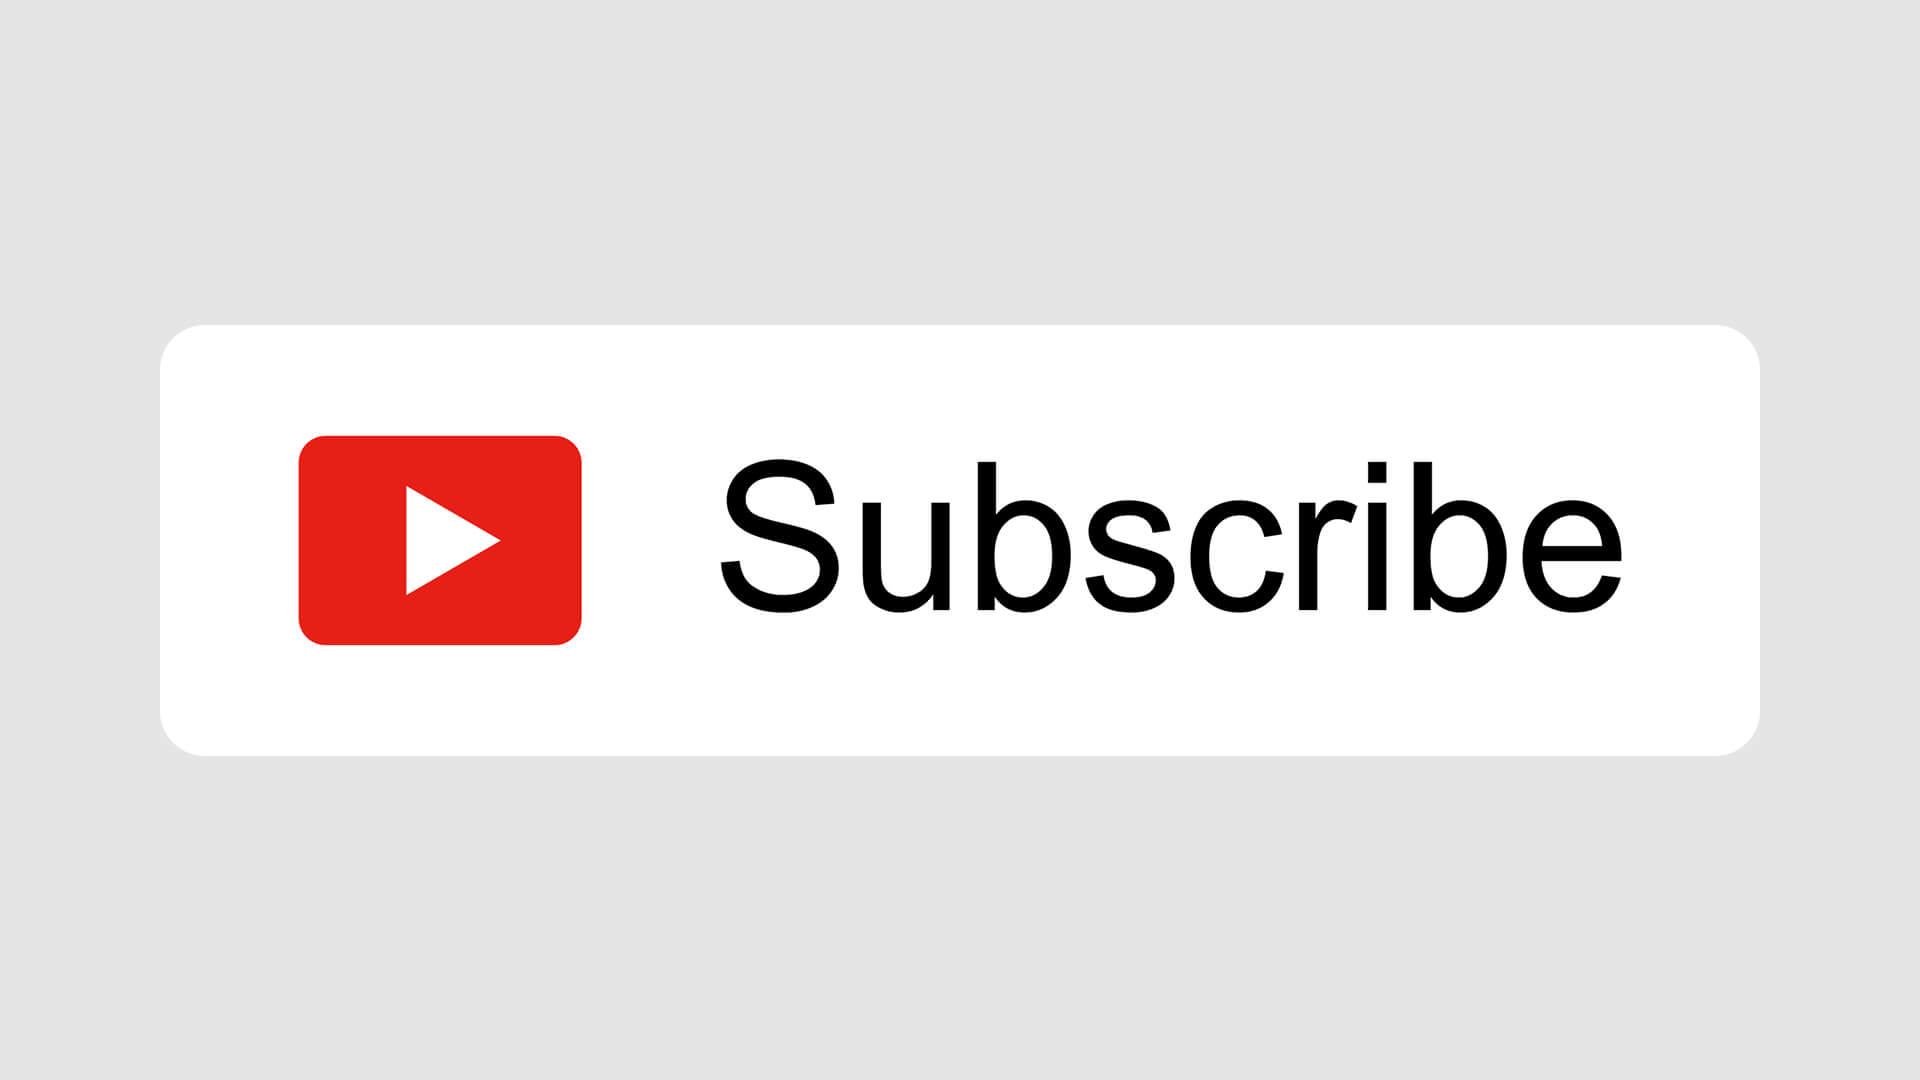 Free YouTube Subscribe Button Download Design Inspiration By AlfredoCreates 13 1